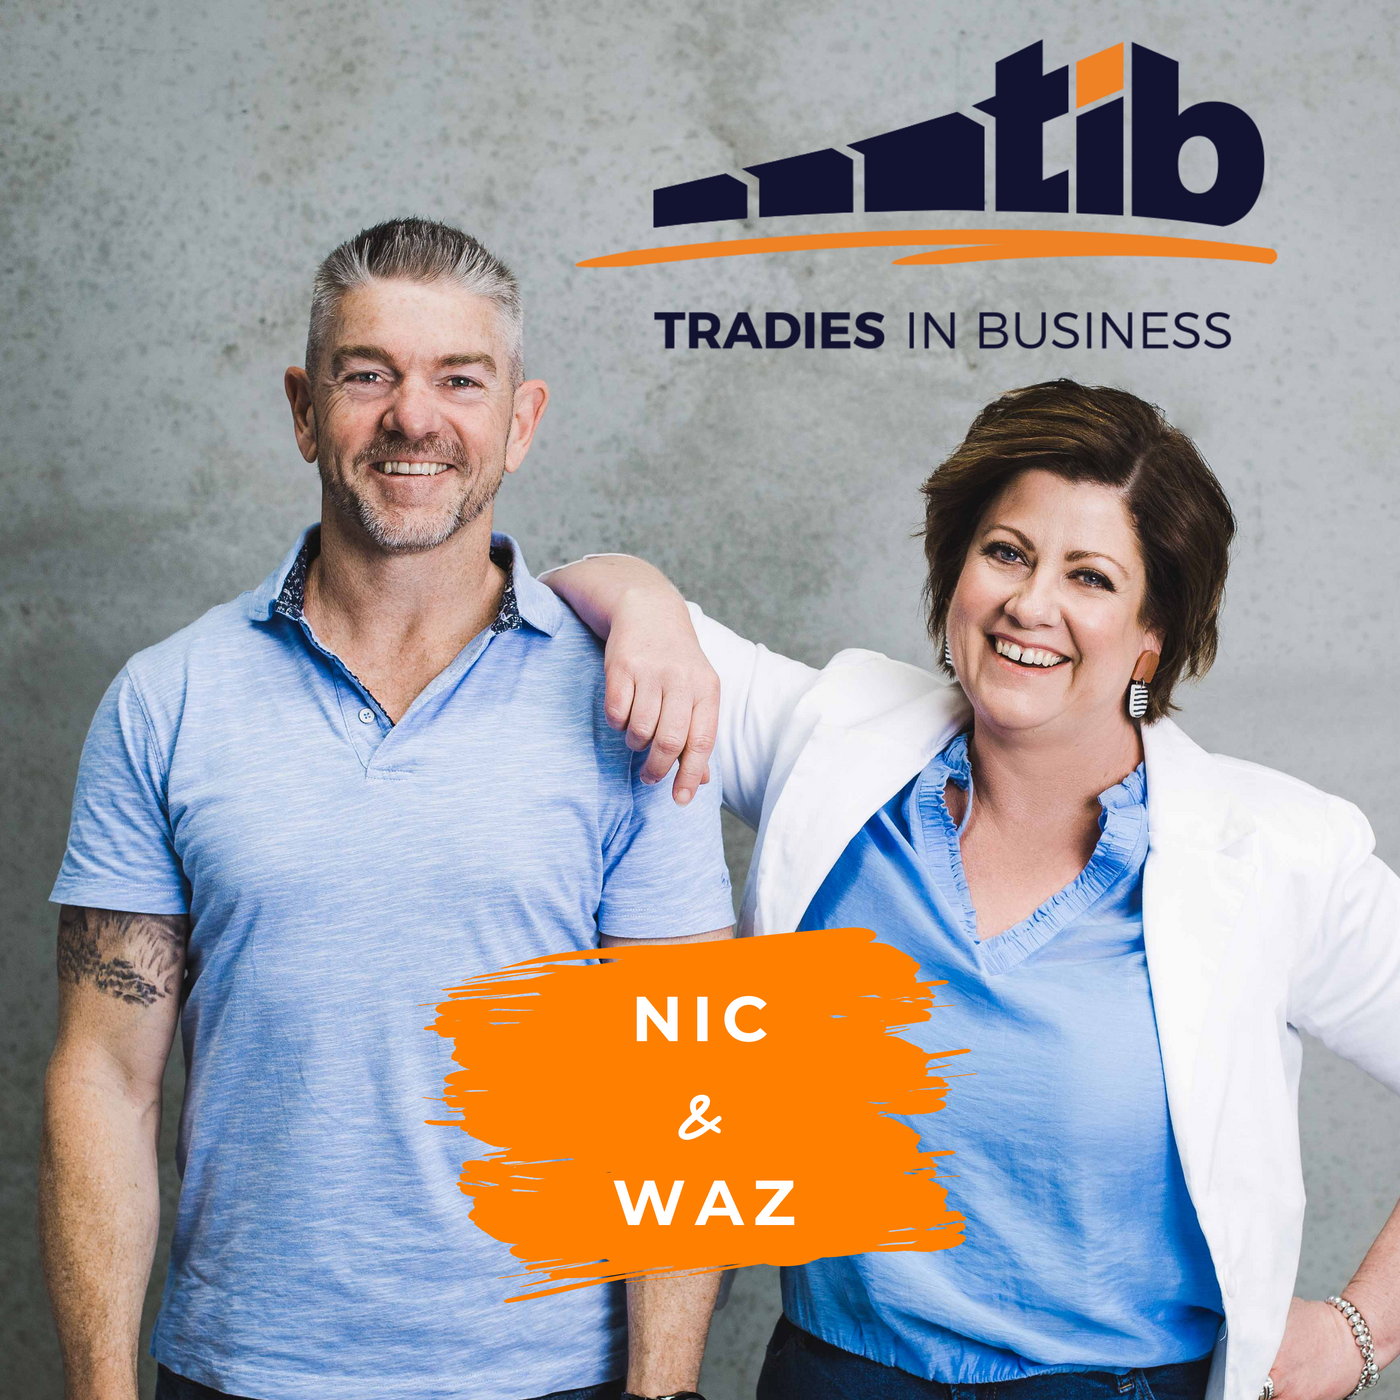 TIB641 Growth, Branding, and Workwear with Troy Yewdall of Totally Workwear